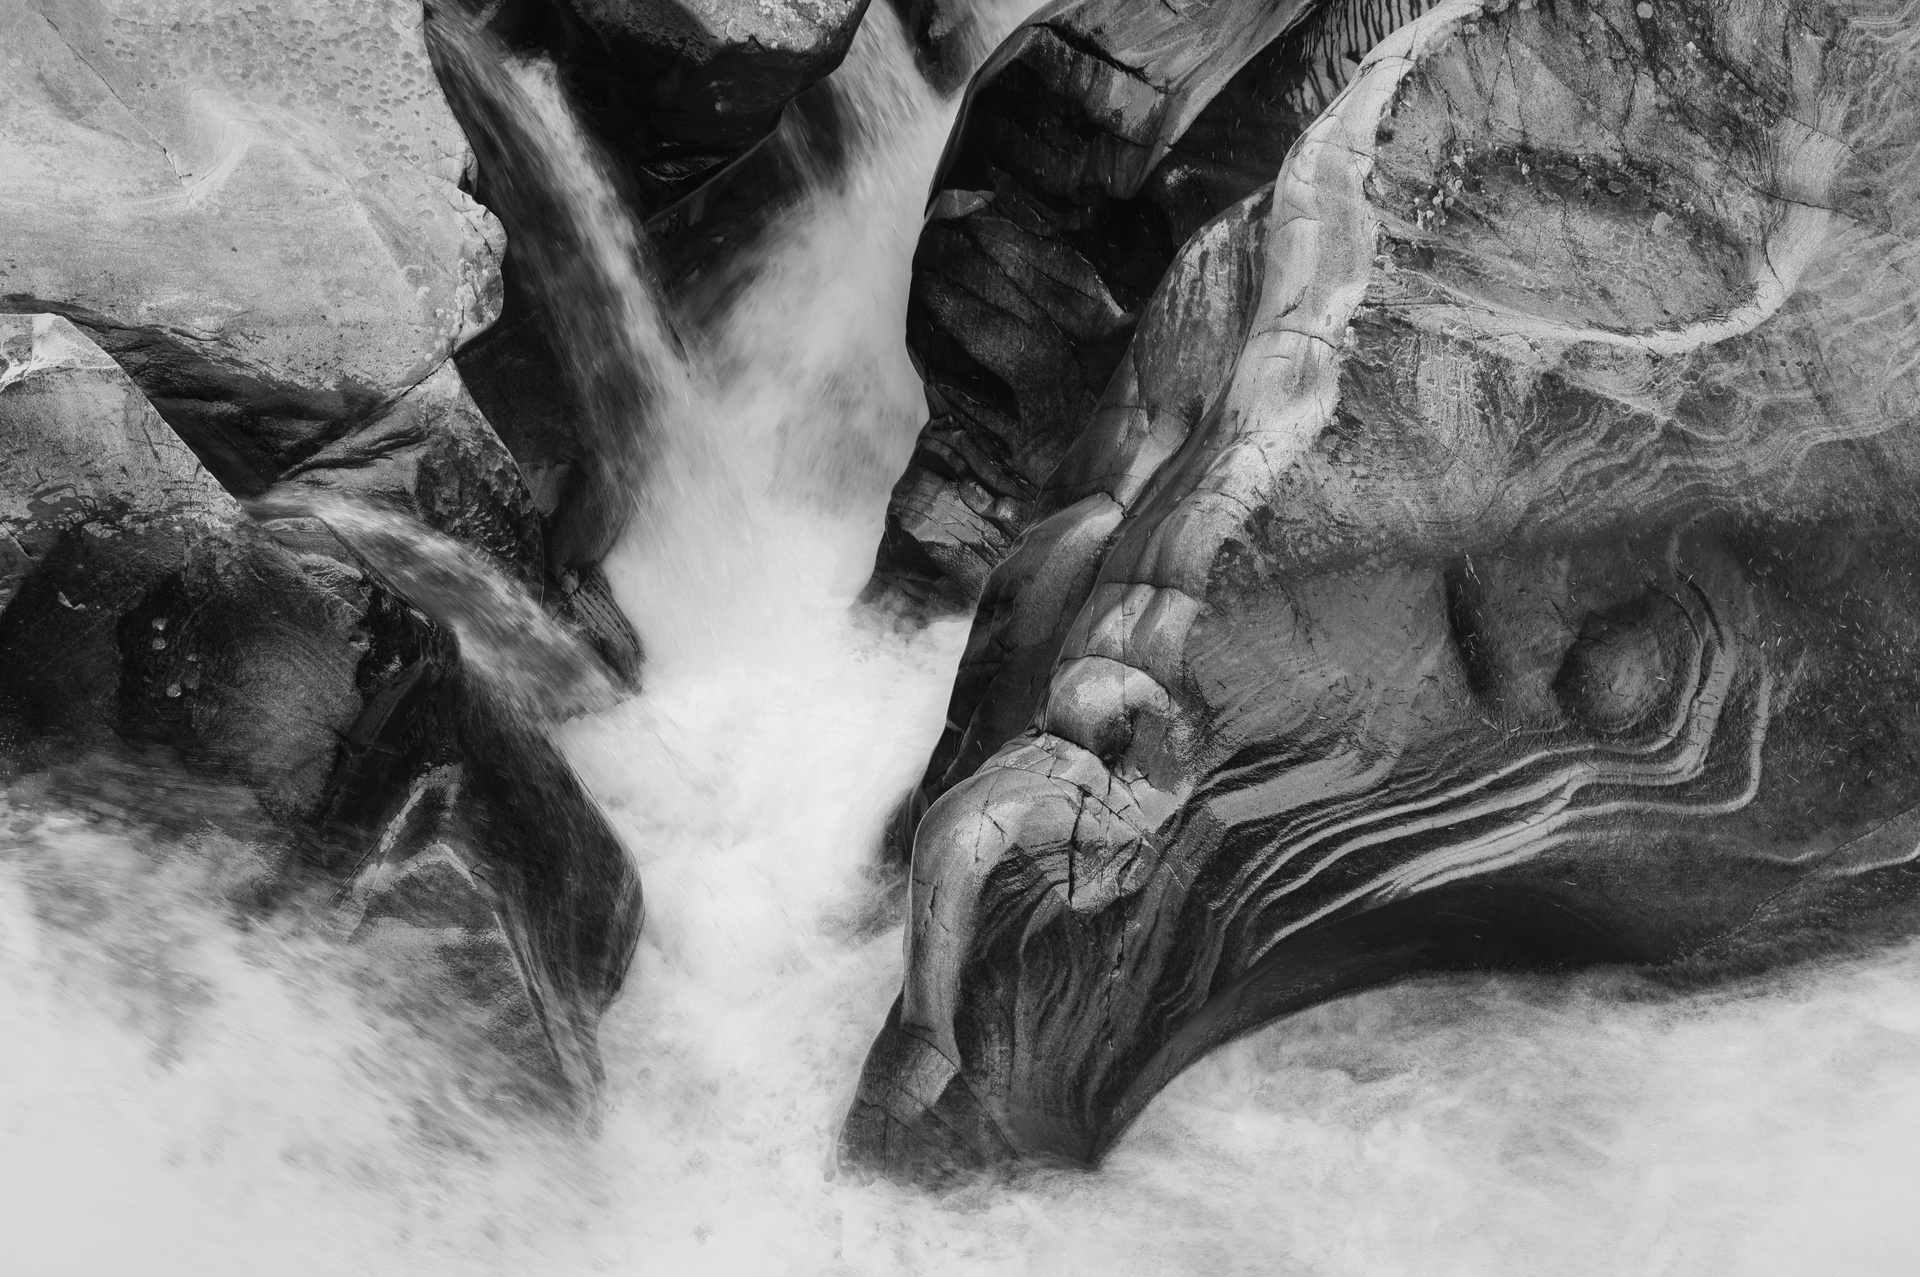 River Garry: Rocks and Water 6